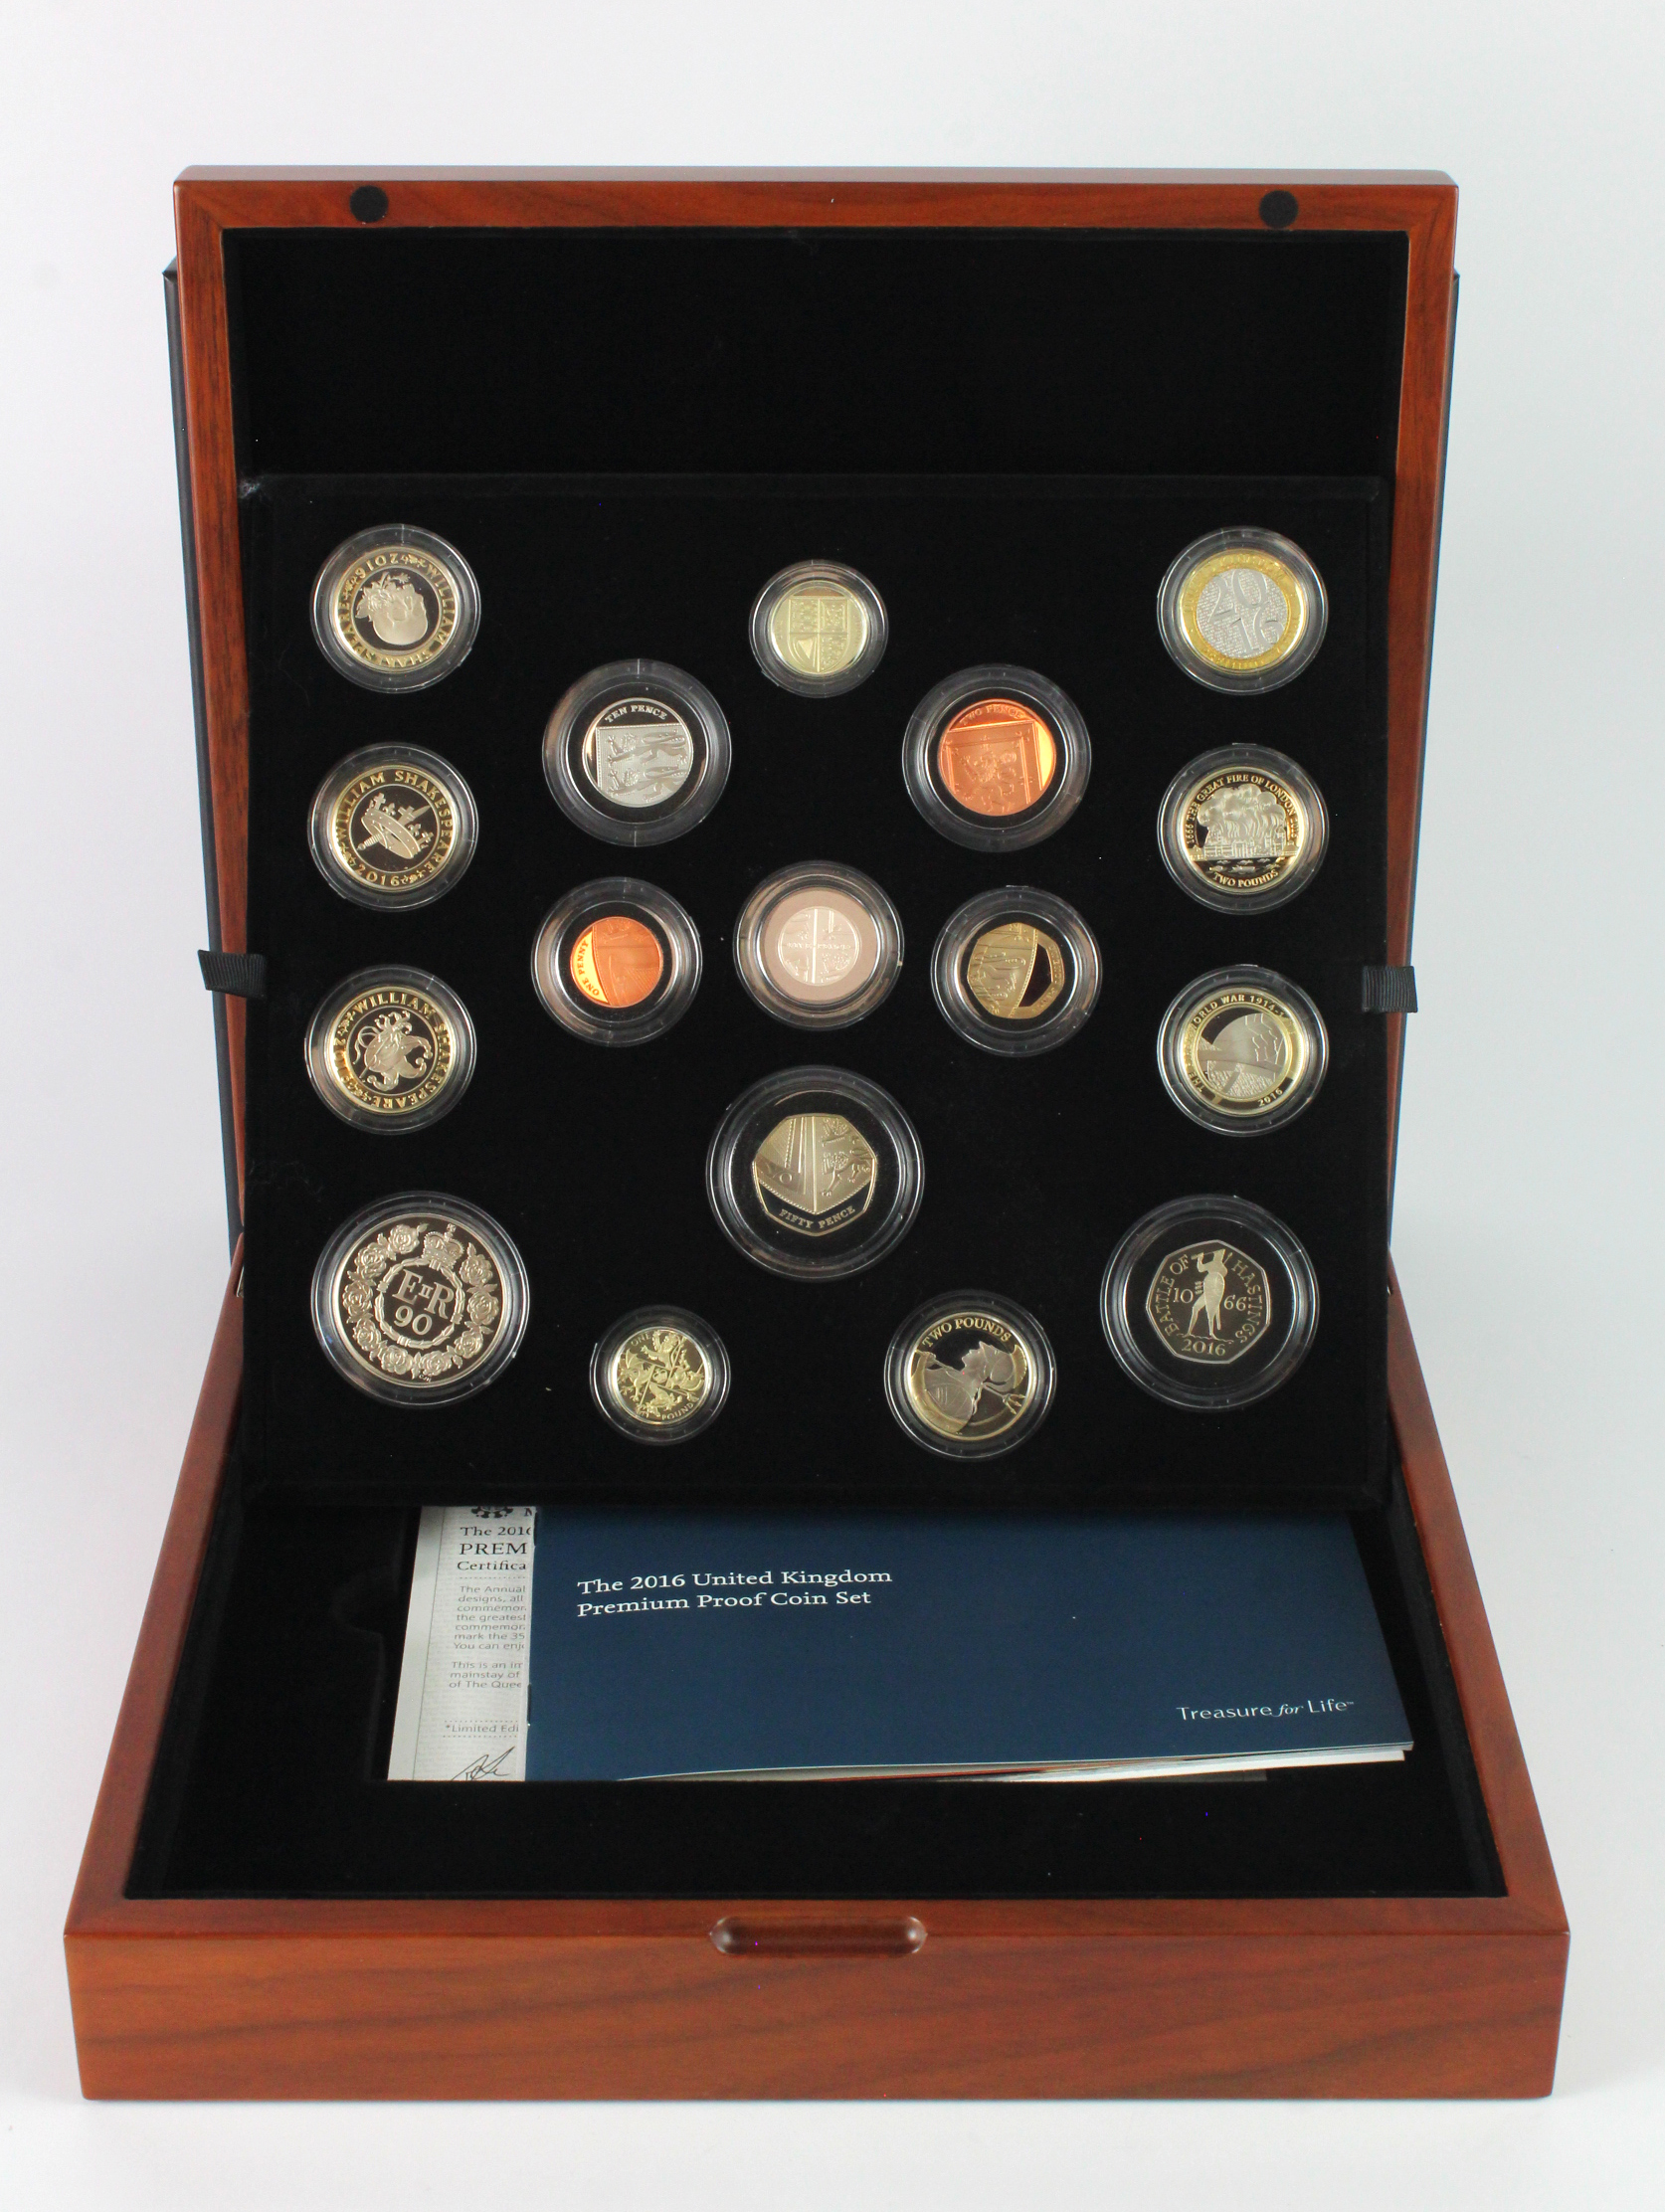 Proof Set 2016 "Premium" issue (16 coins plus medallion). aFDC boxed as issued